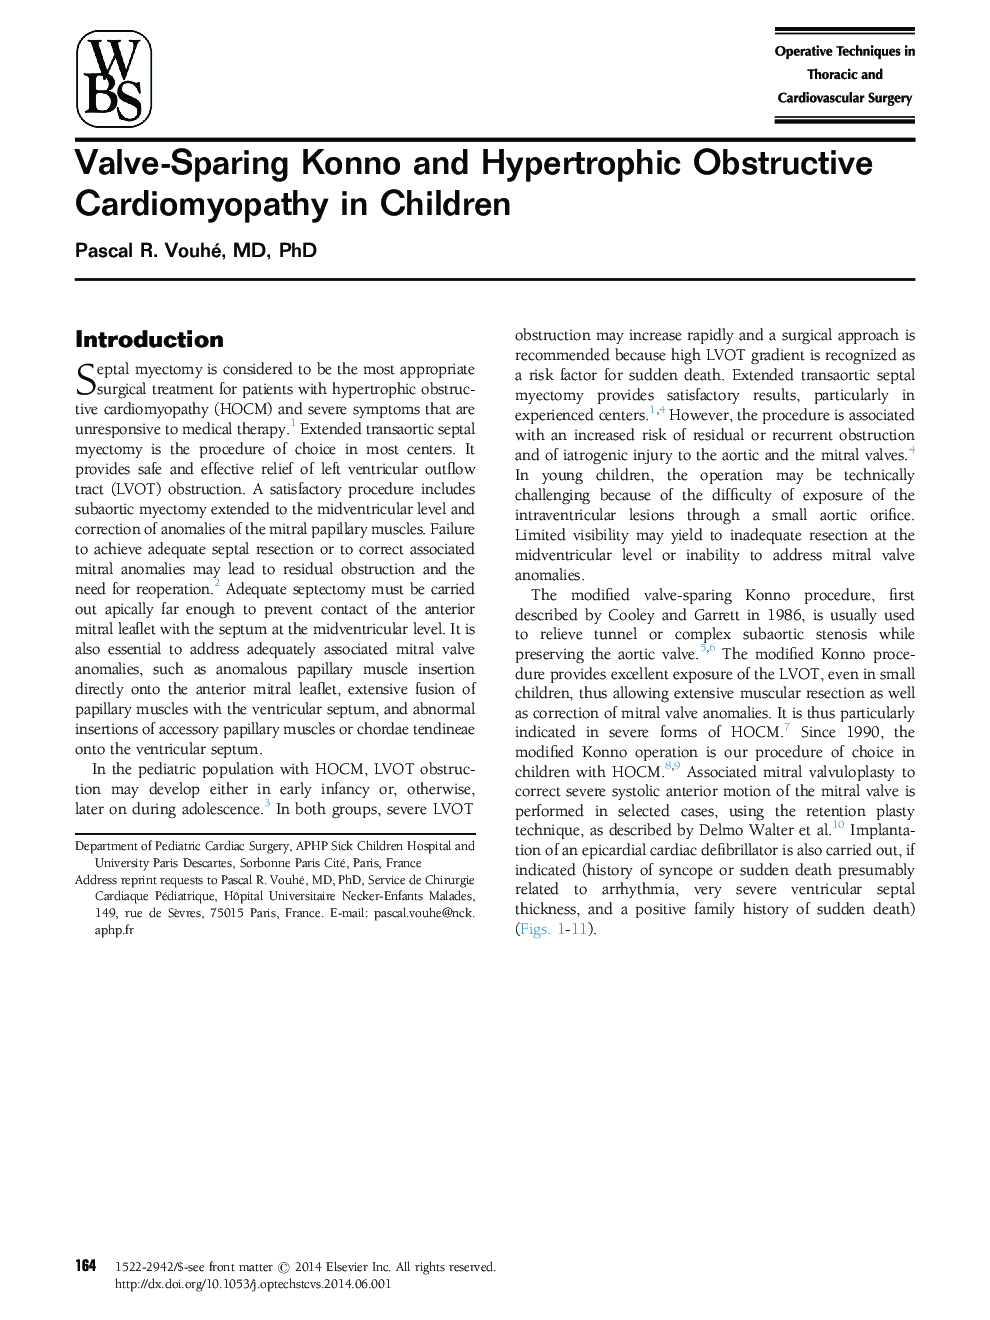 Valve-Sparing Konno and Hypertrophic Obstructive Cardiomyopathy in Children